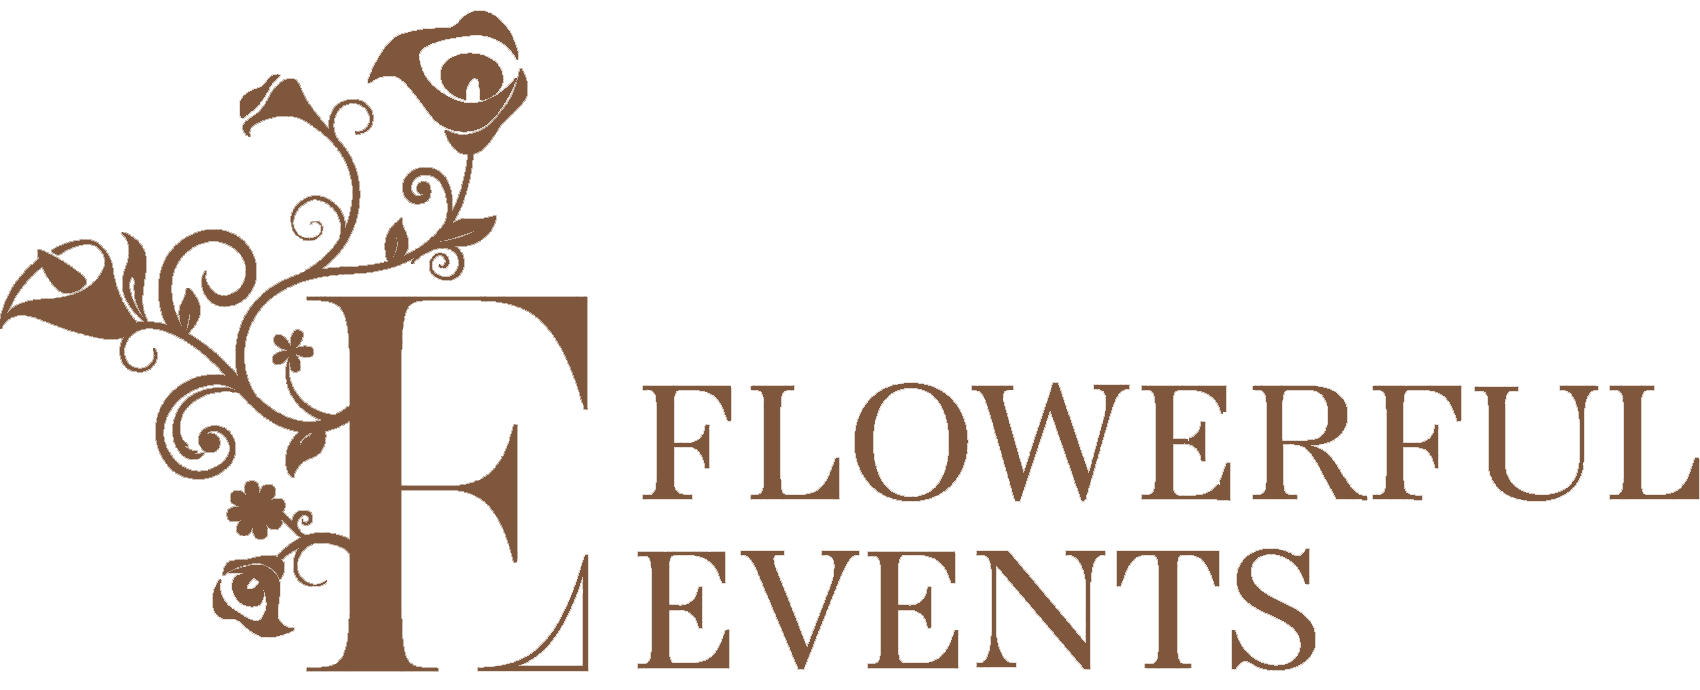 The logo for flowerful events.